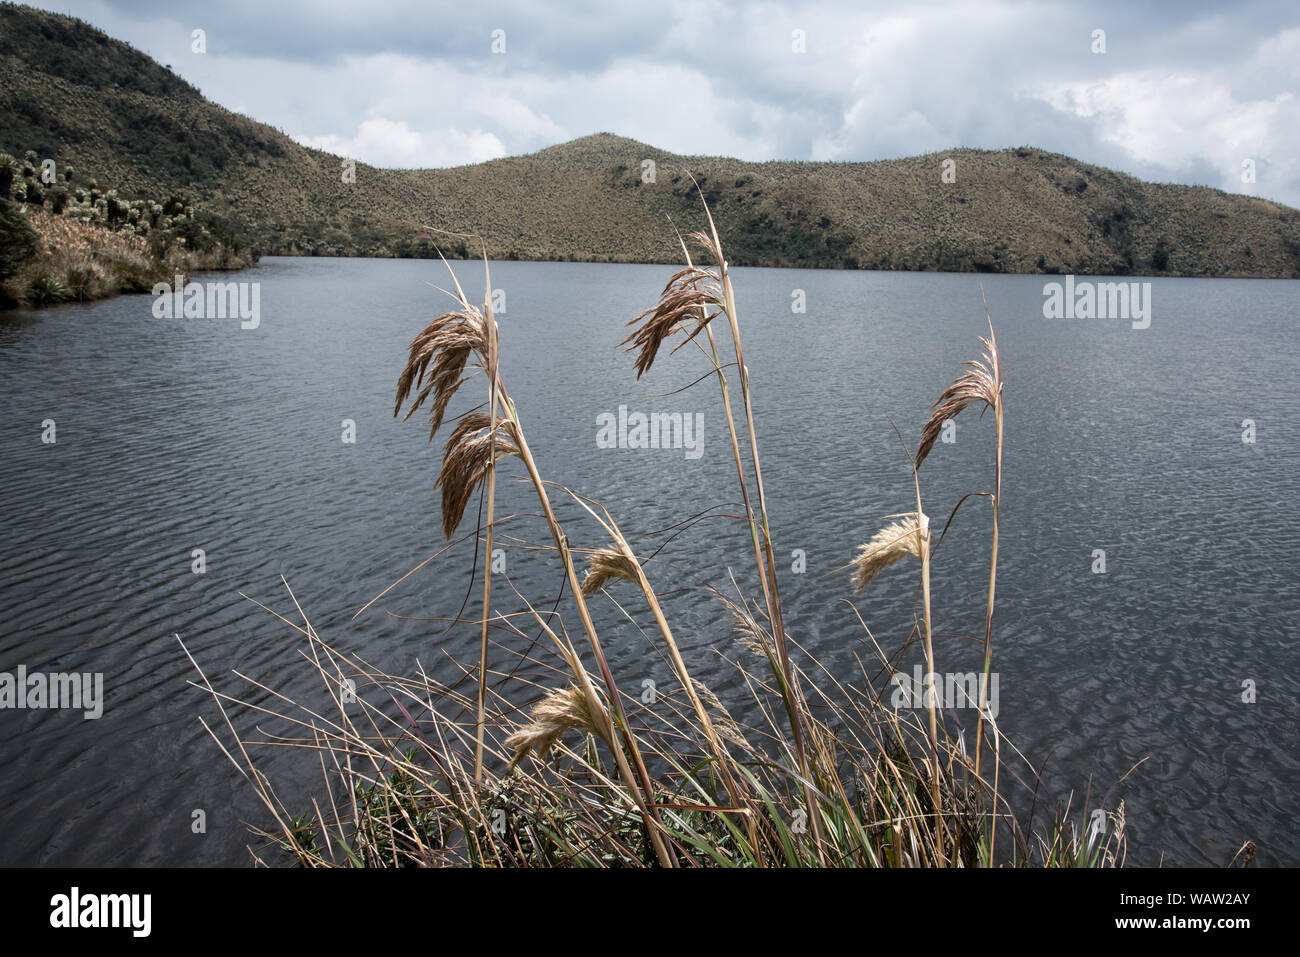 Grass growing at Laguna Voladero on the Páramo highland in the Reserve Ecológica El Ángel at 3800 meters in the Andes of Northern Ecuador. Stock Photo